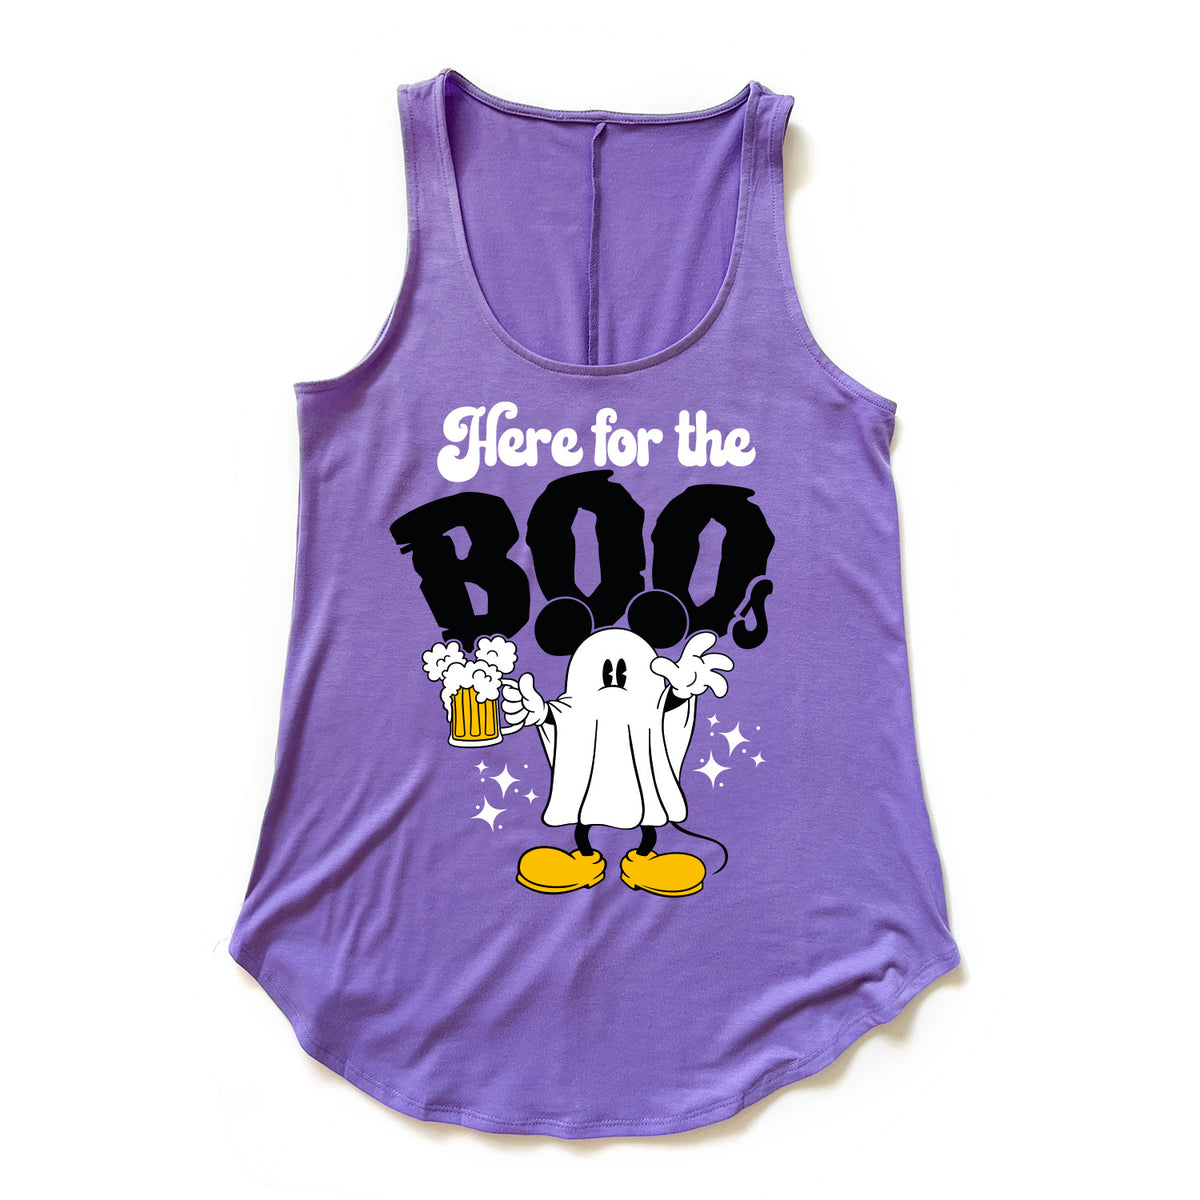 Here for the Boos Tank Top